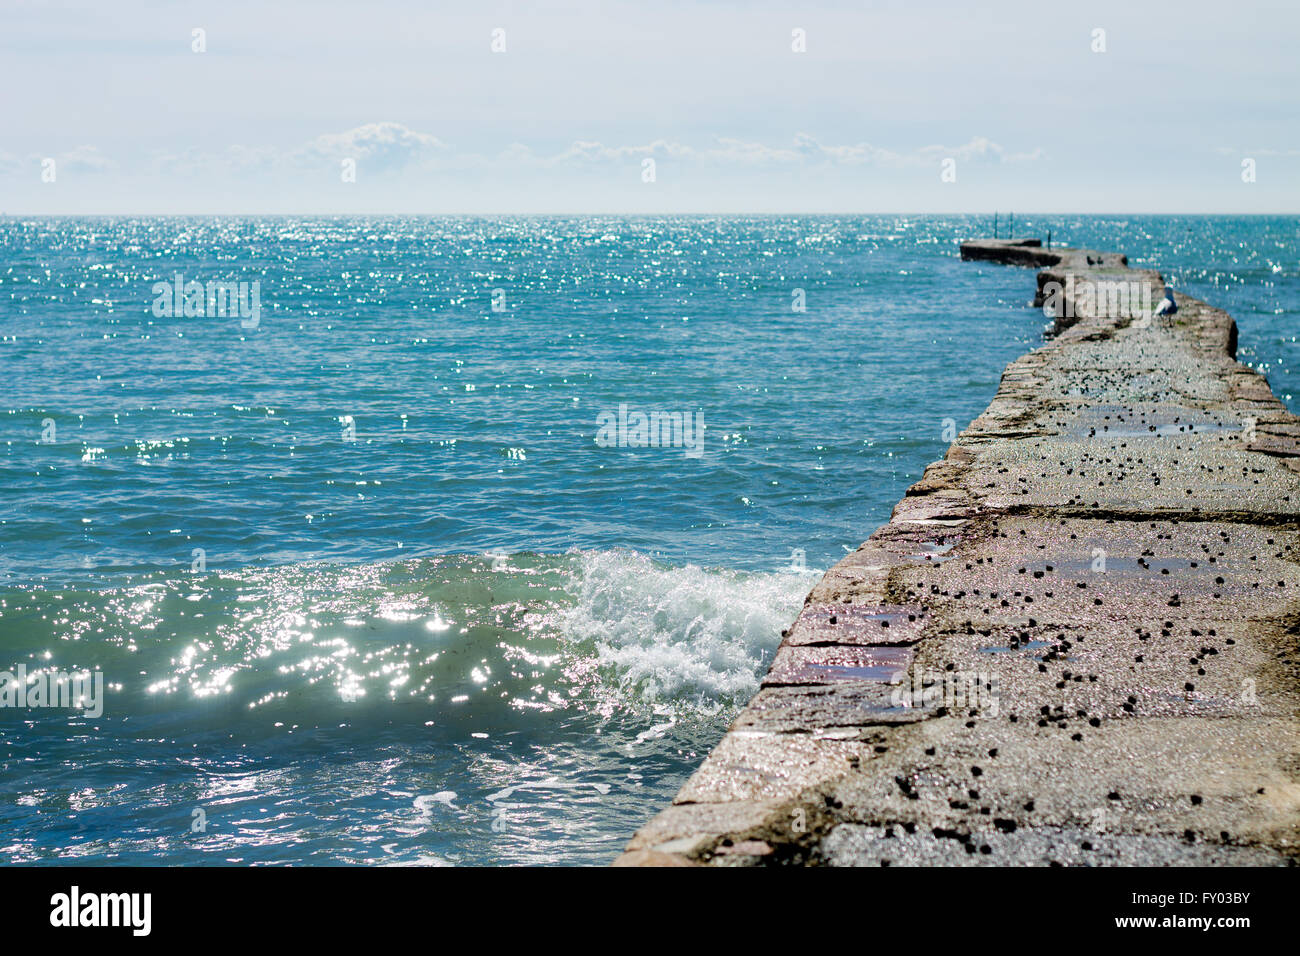 Sea wall at L'Etacq, St. Ouen, Jersey just after high tide on Tuesday 12th April 2016 on a very hot, sunny day. Stock Photo